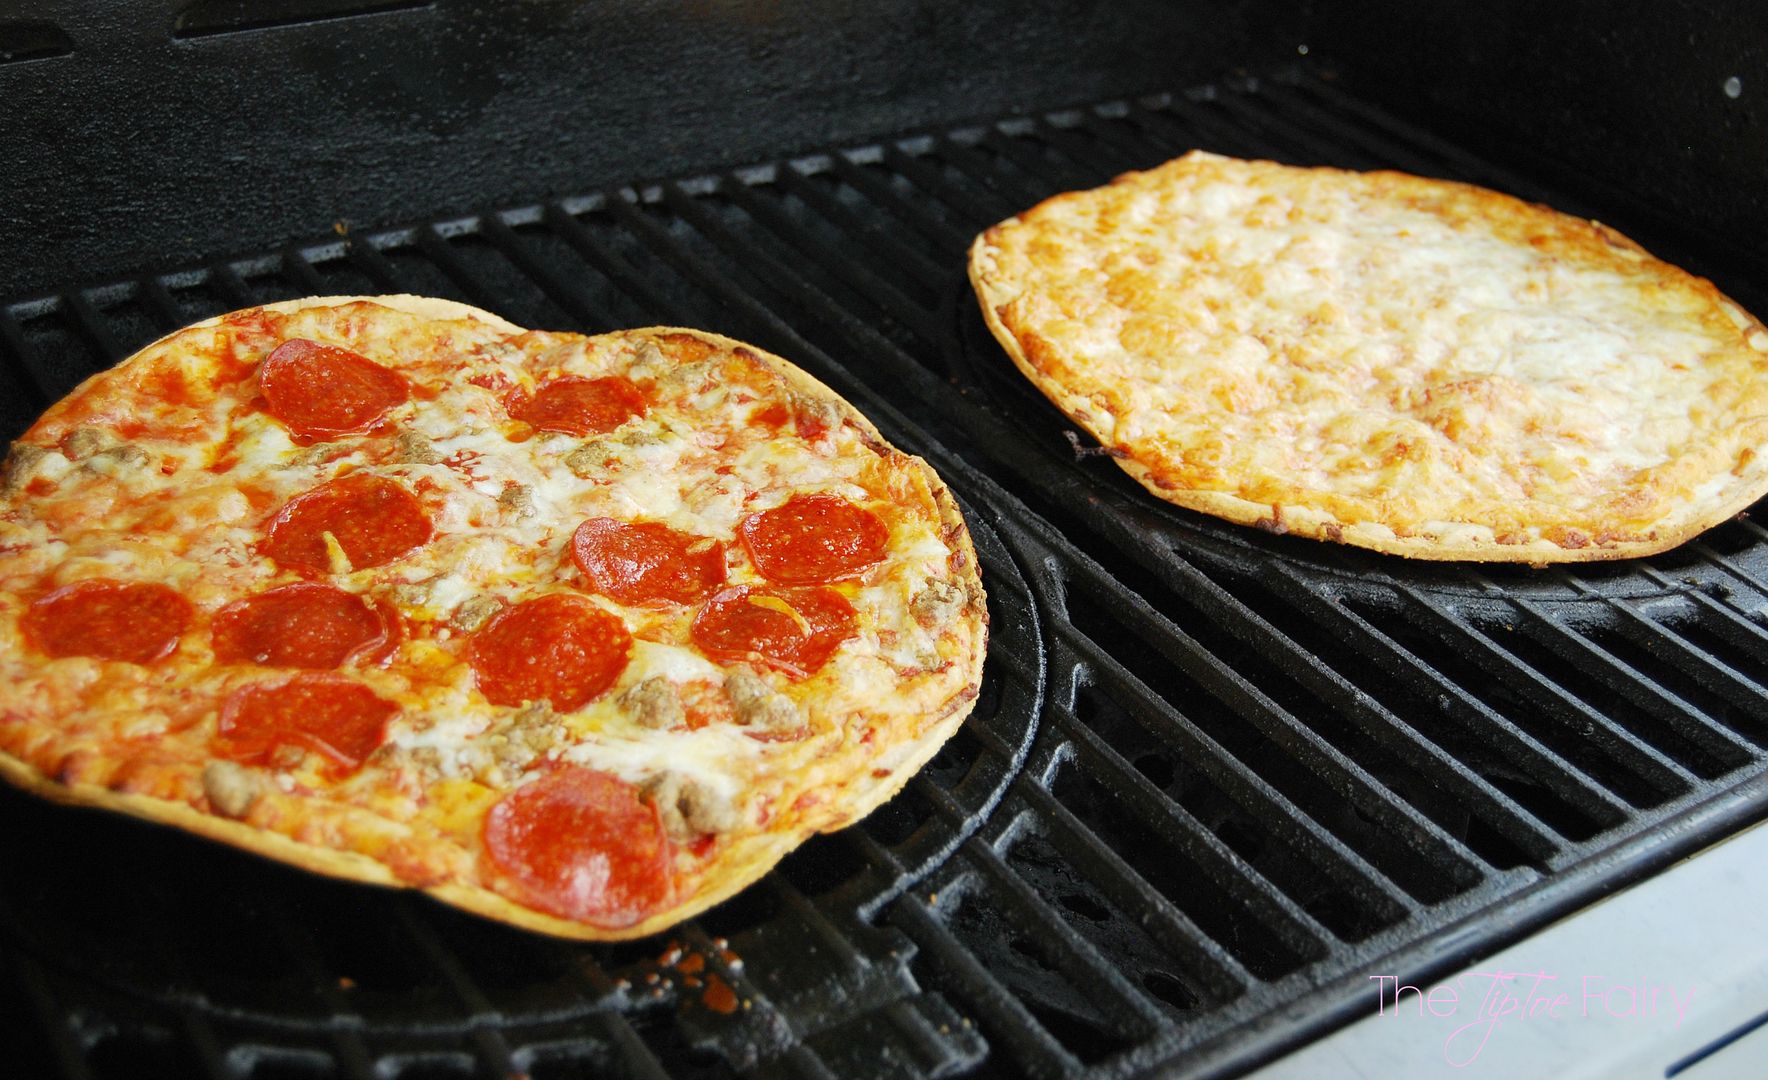 Grill Your Meal from Start to Finish - Salad, Pizza, & Dessert #food #foodie